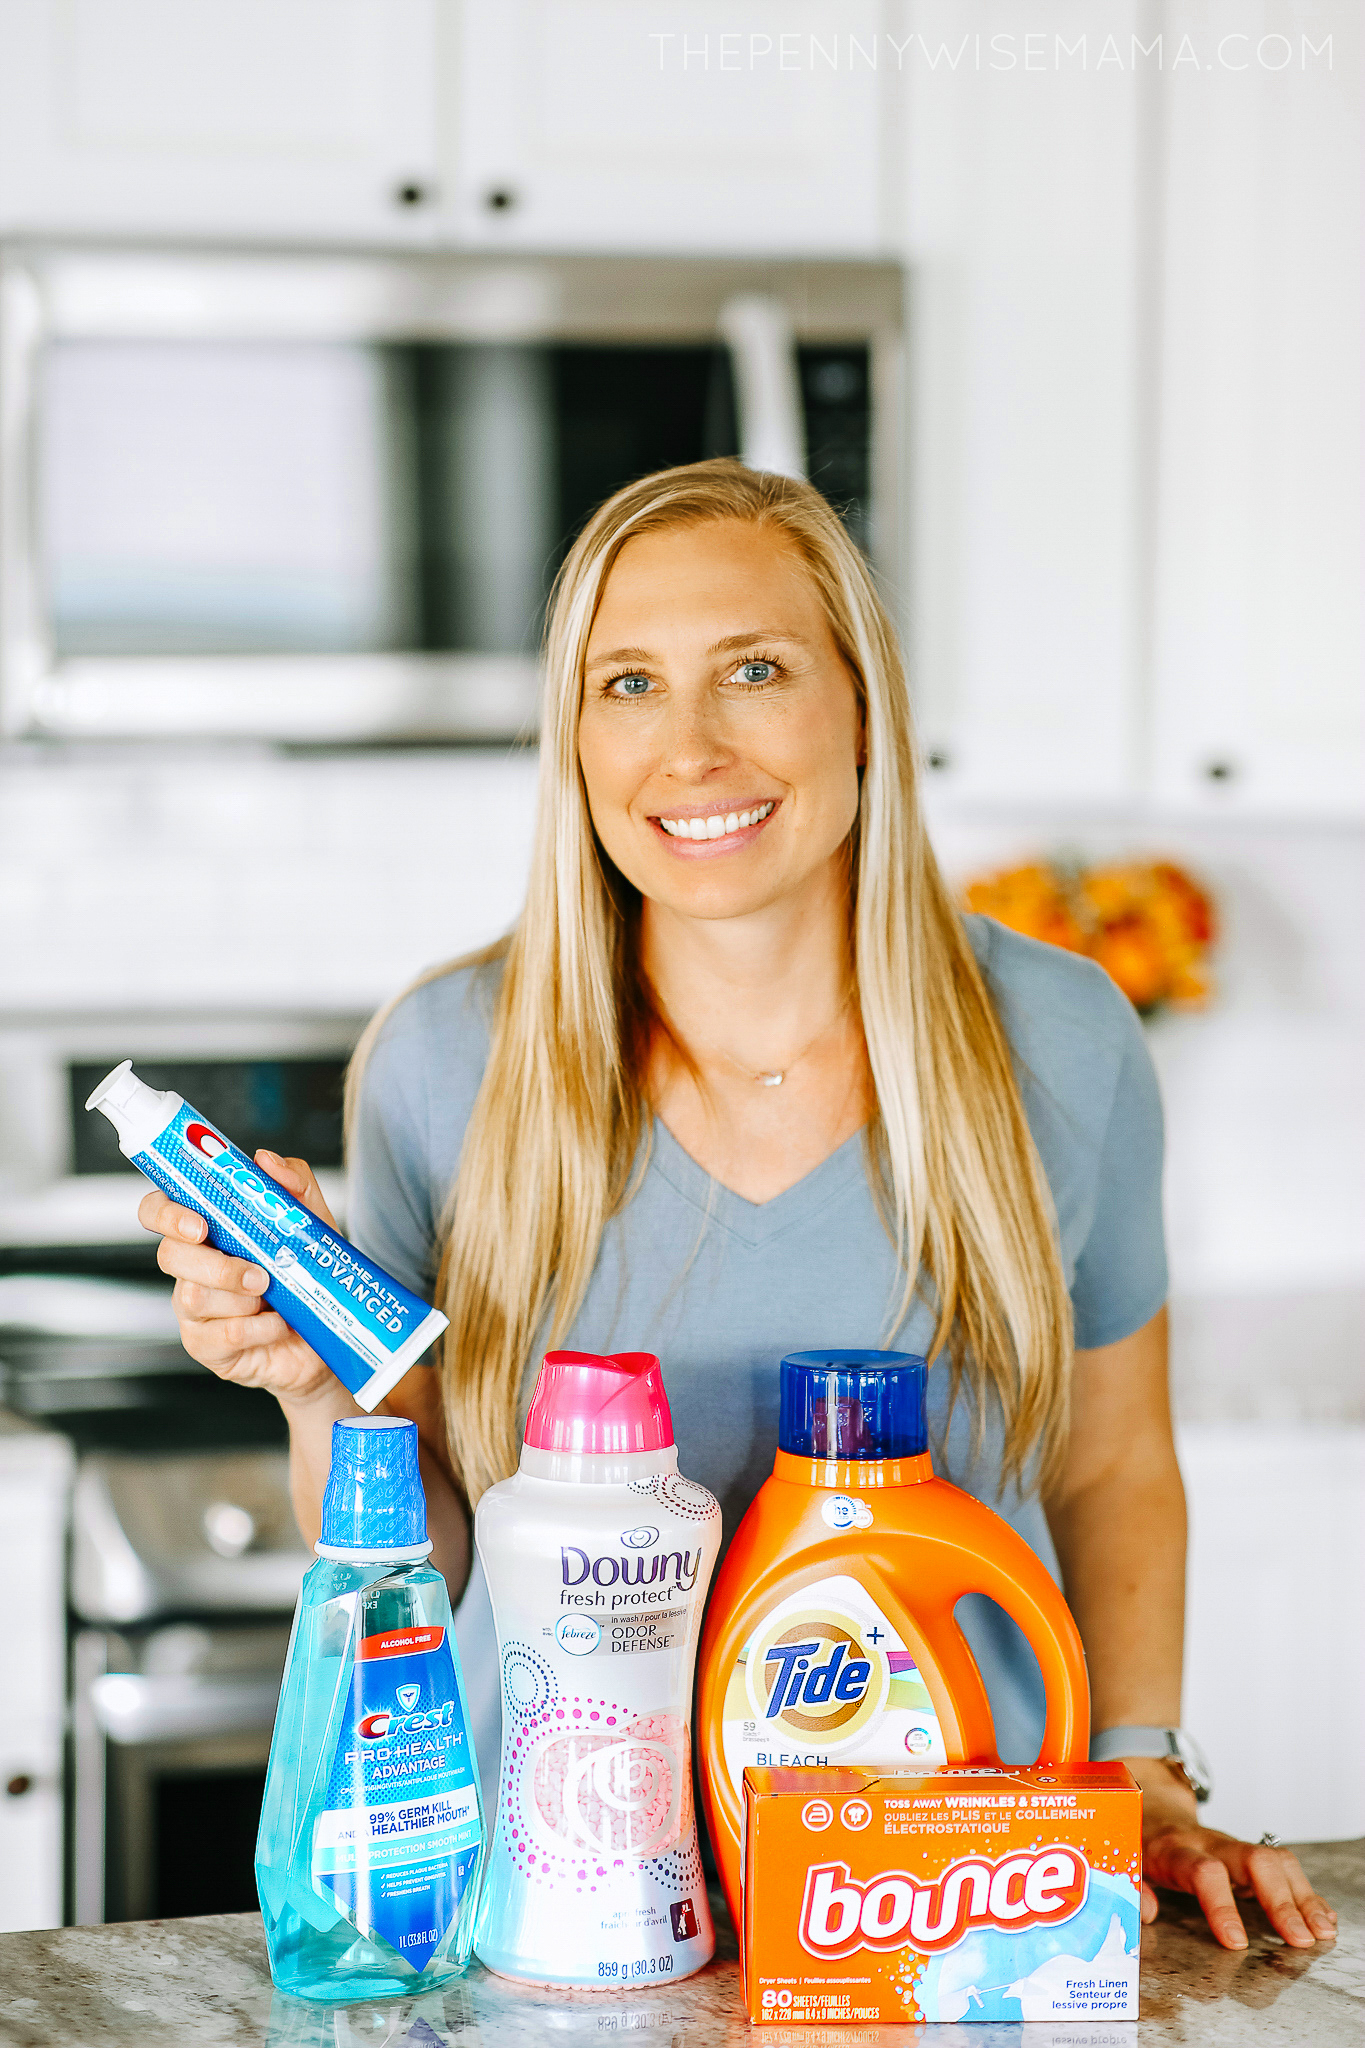 Earn Rewards and Support Causes You Care About with P&G Good Everyday